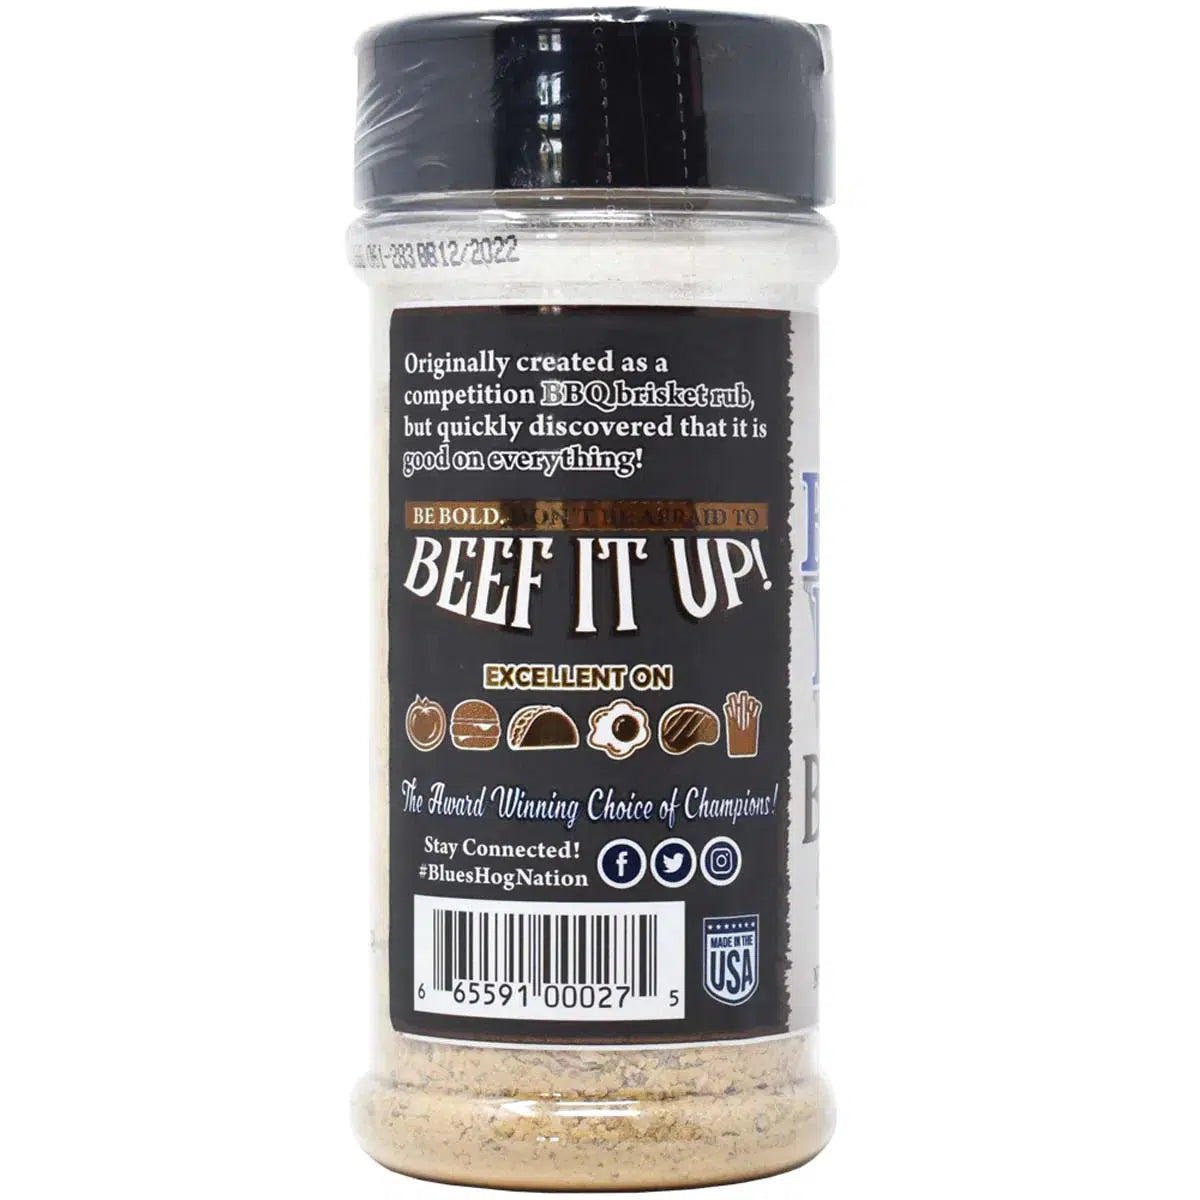 Best For Beef, Complete 6 Pack Seasoning Collection